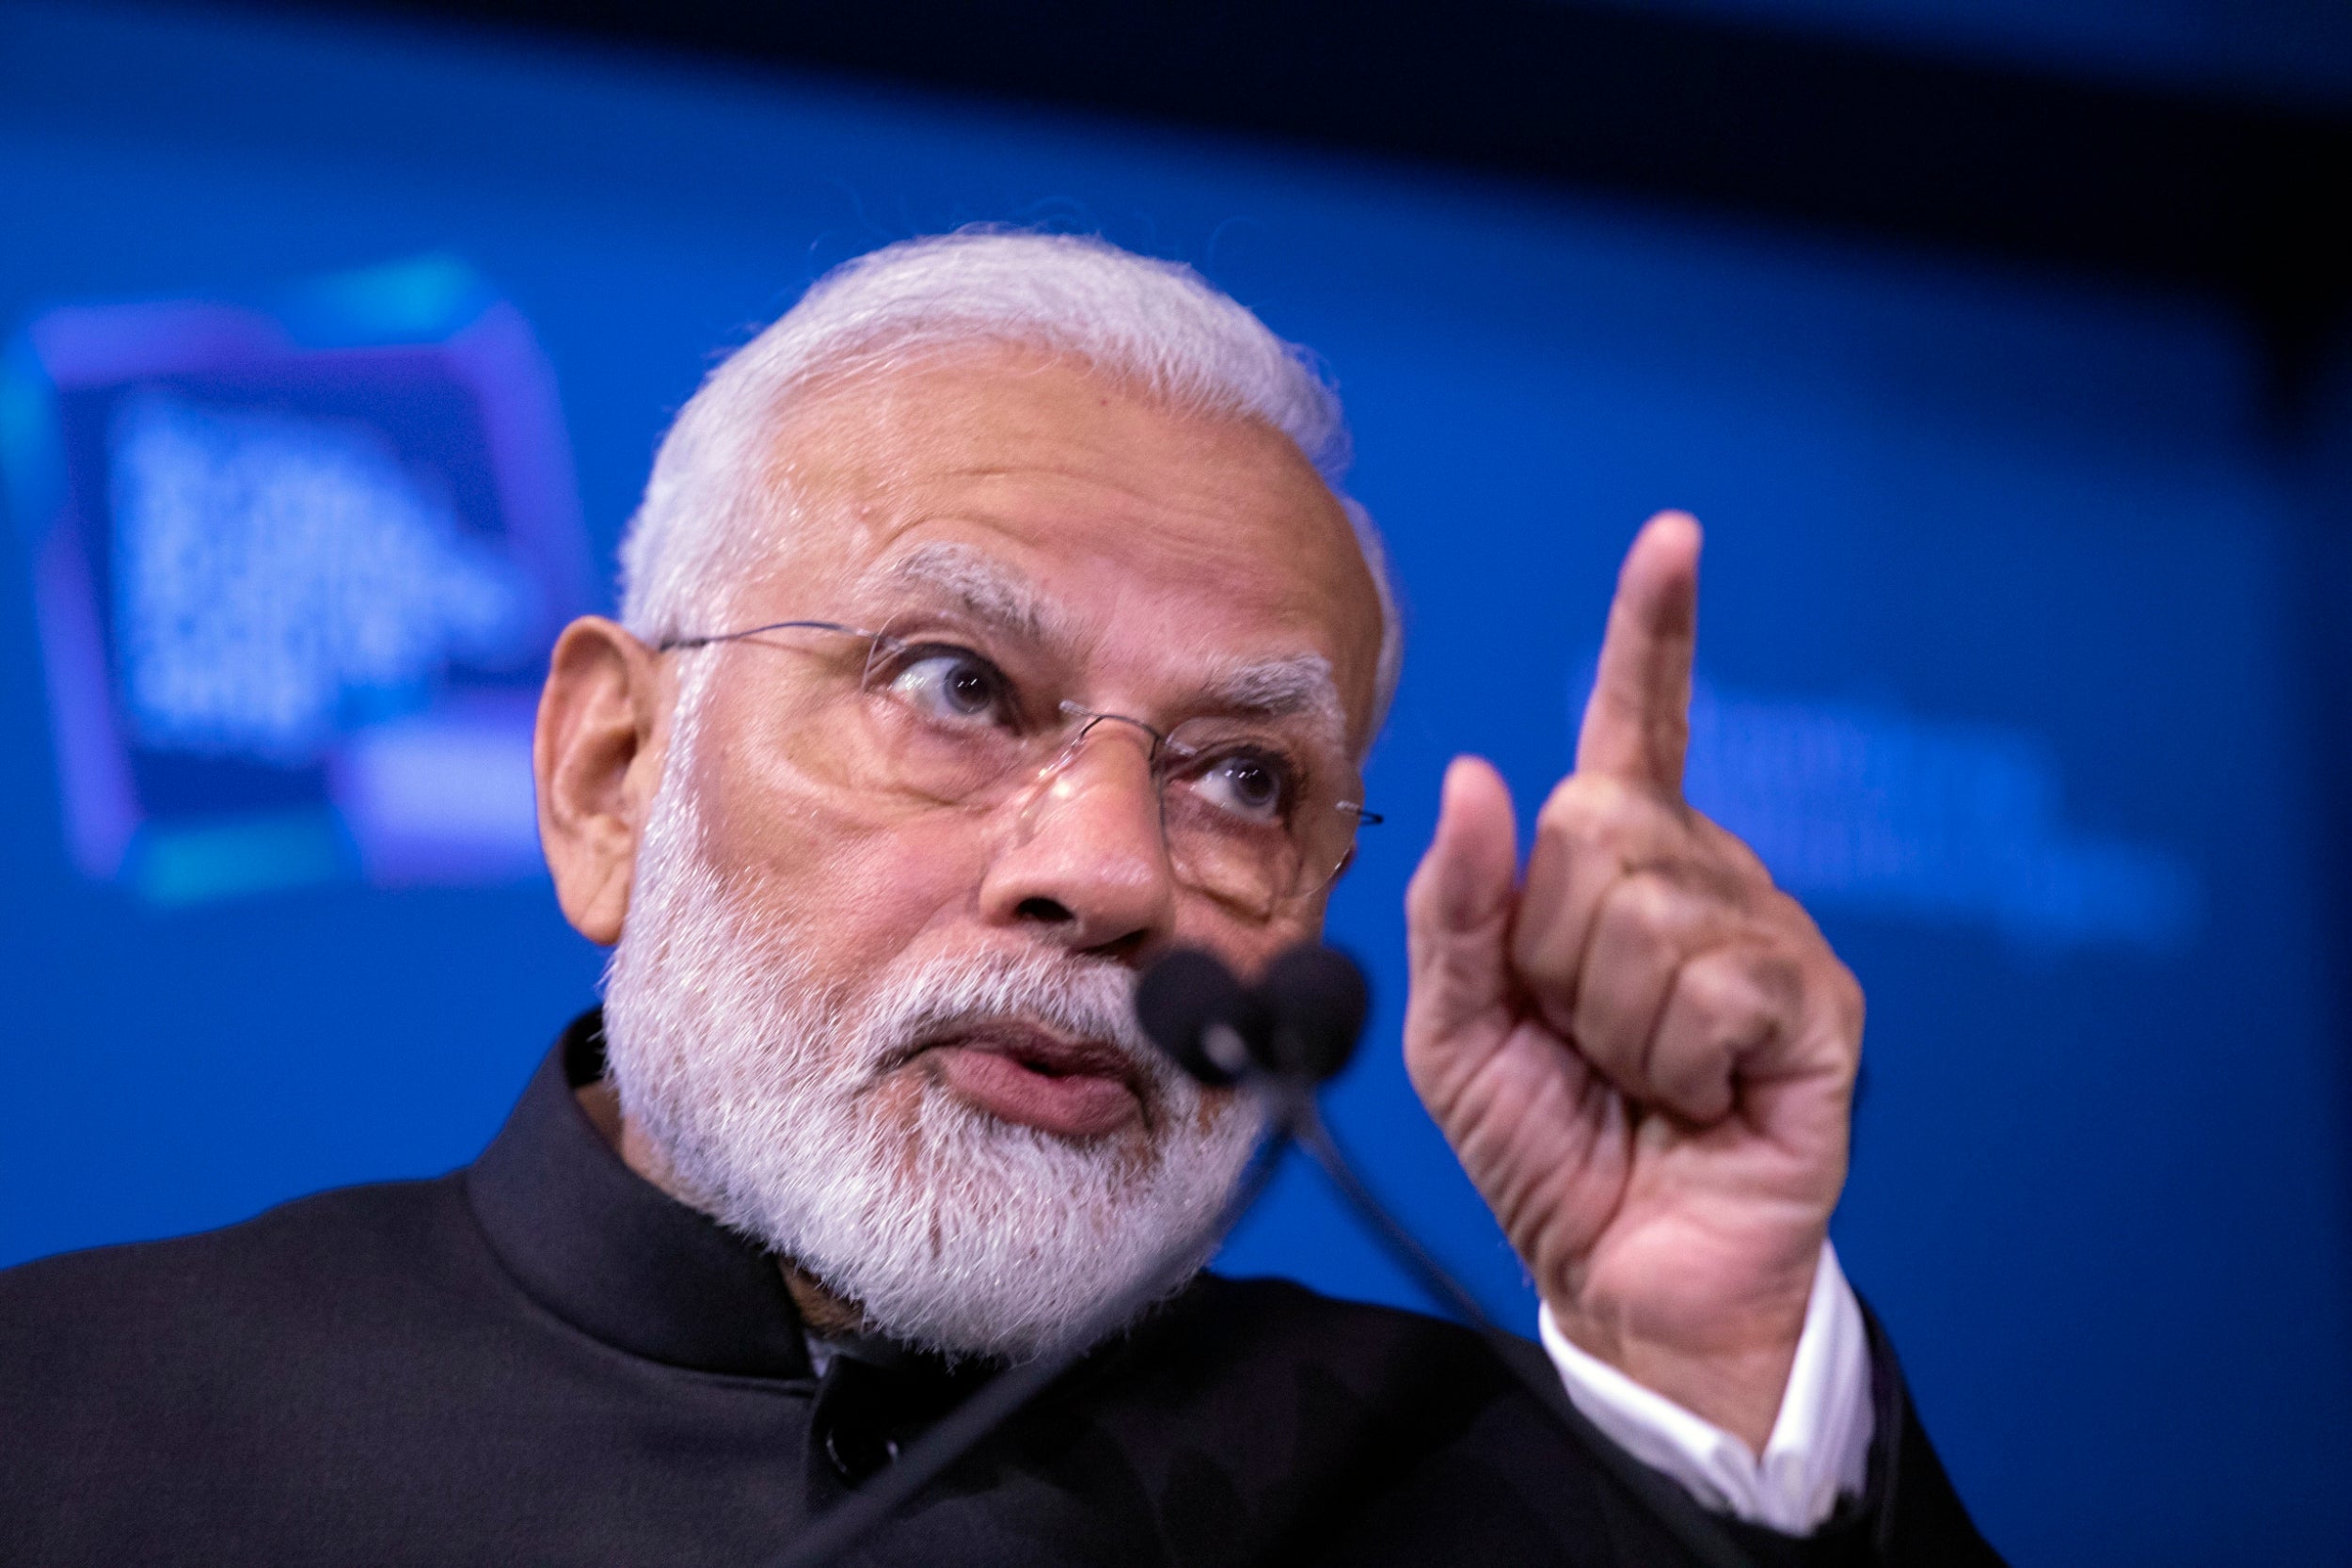 Indian Prime Minister Narendra Modi speaks at the Bloomberg Global Business Forum in New York. Earlier, he was named one of four 2019 Global Goalkeepers by the Gates Foundation